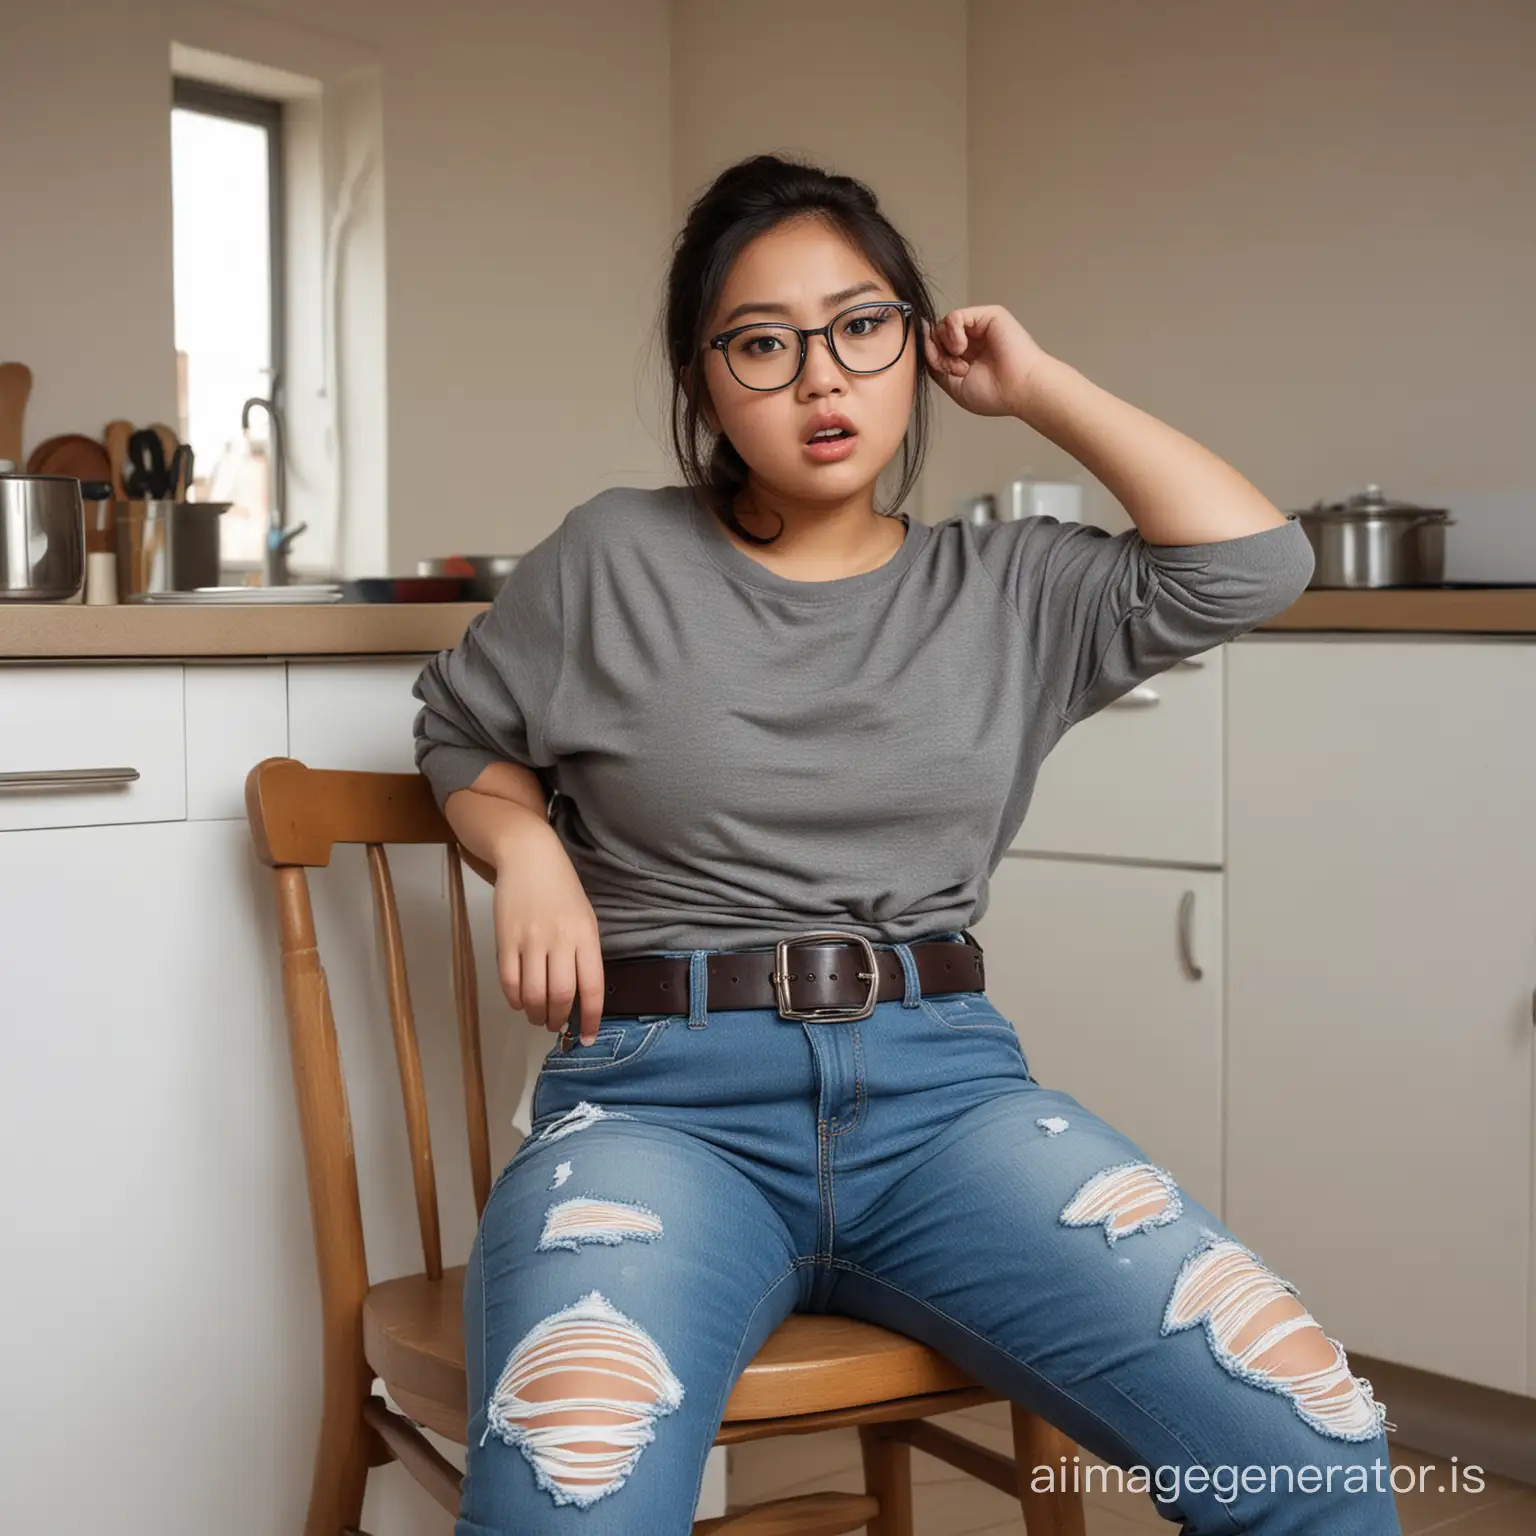 an asian curvy girl in anger,13 years,glasses,sitting on a chair,stern face,ripped tight jeans with belt,kitchen